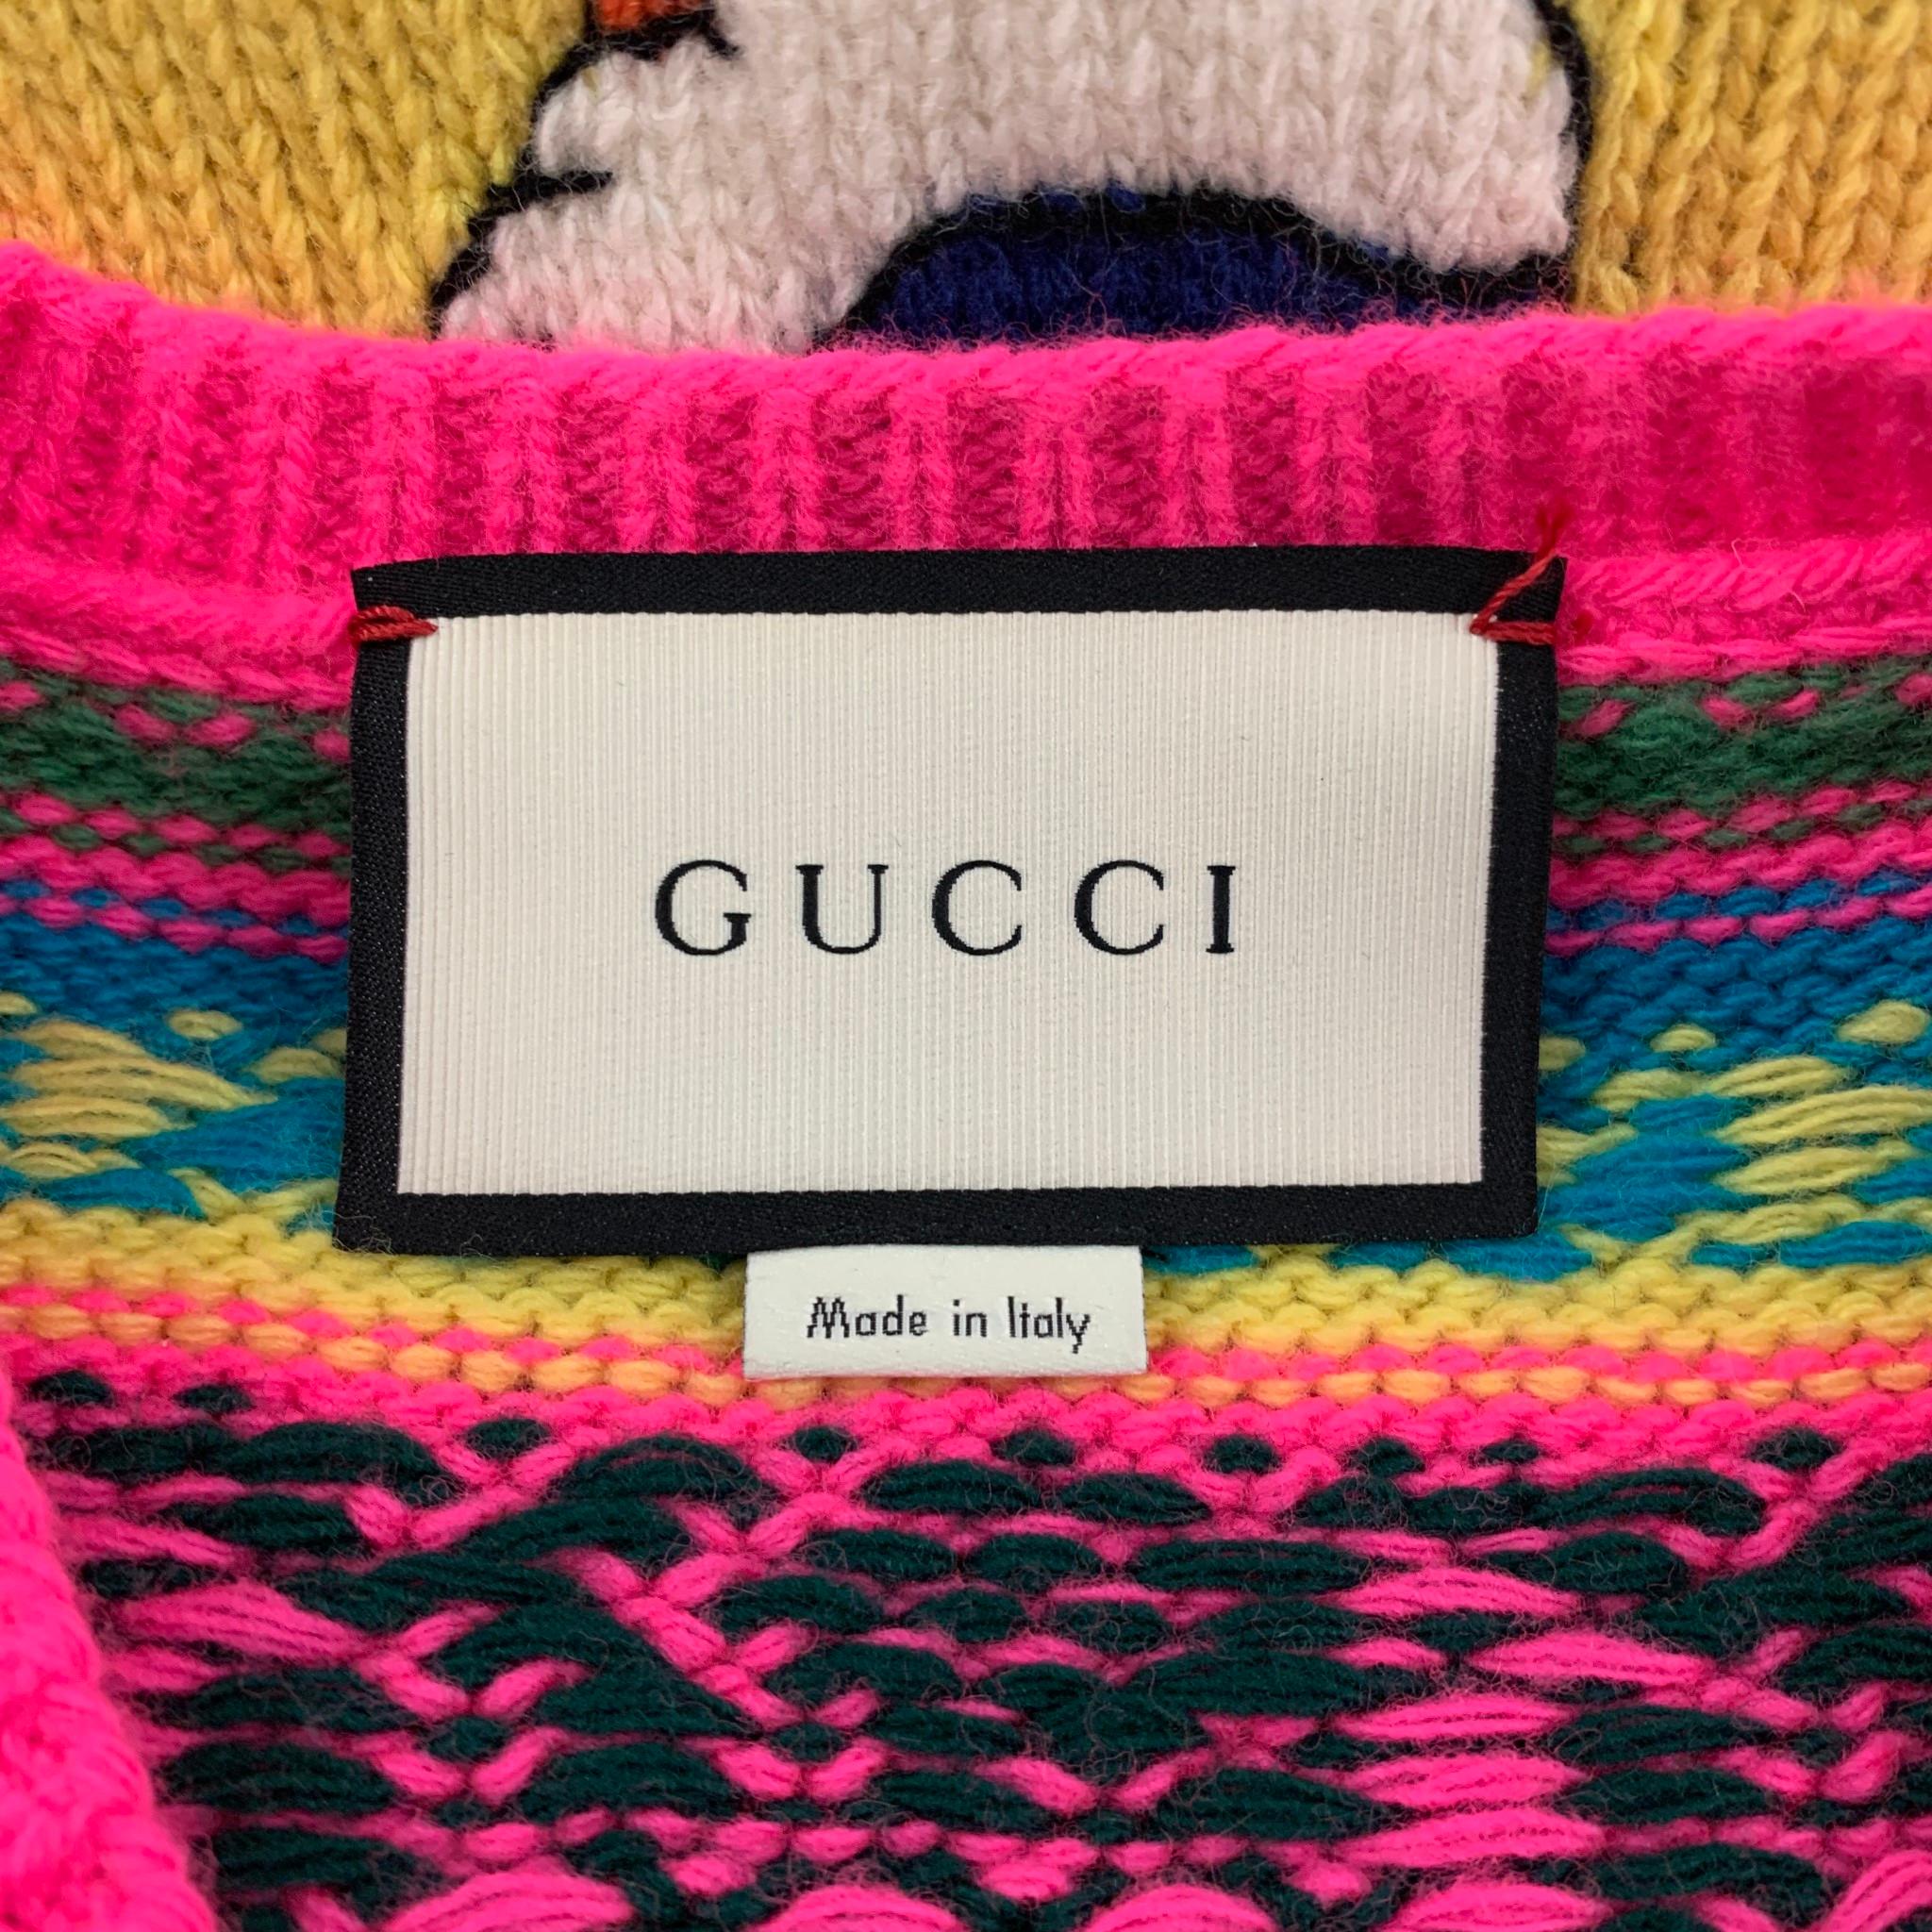 GUCCI sweater vest comes in a multi-color knitted wool with a 